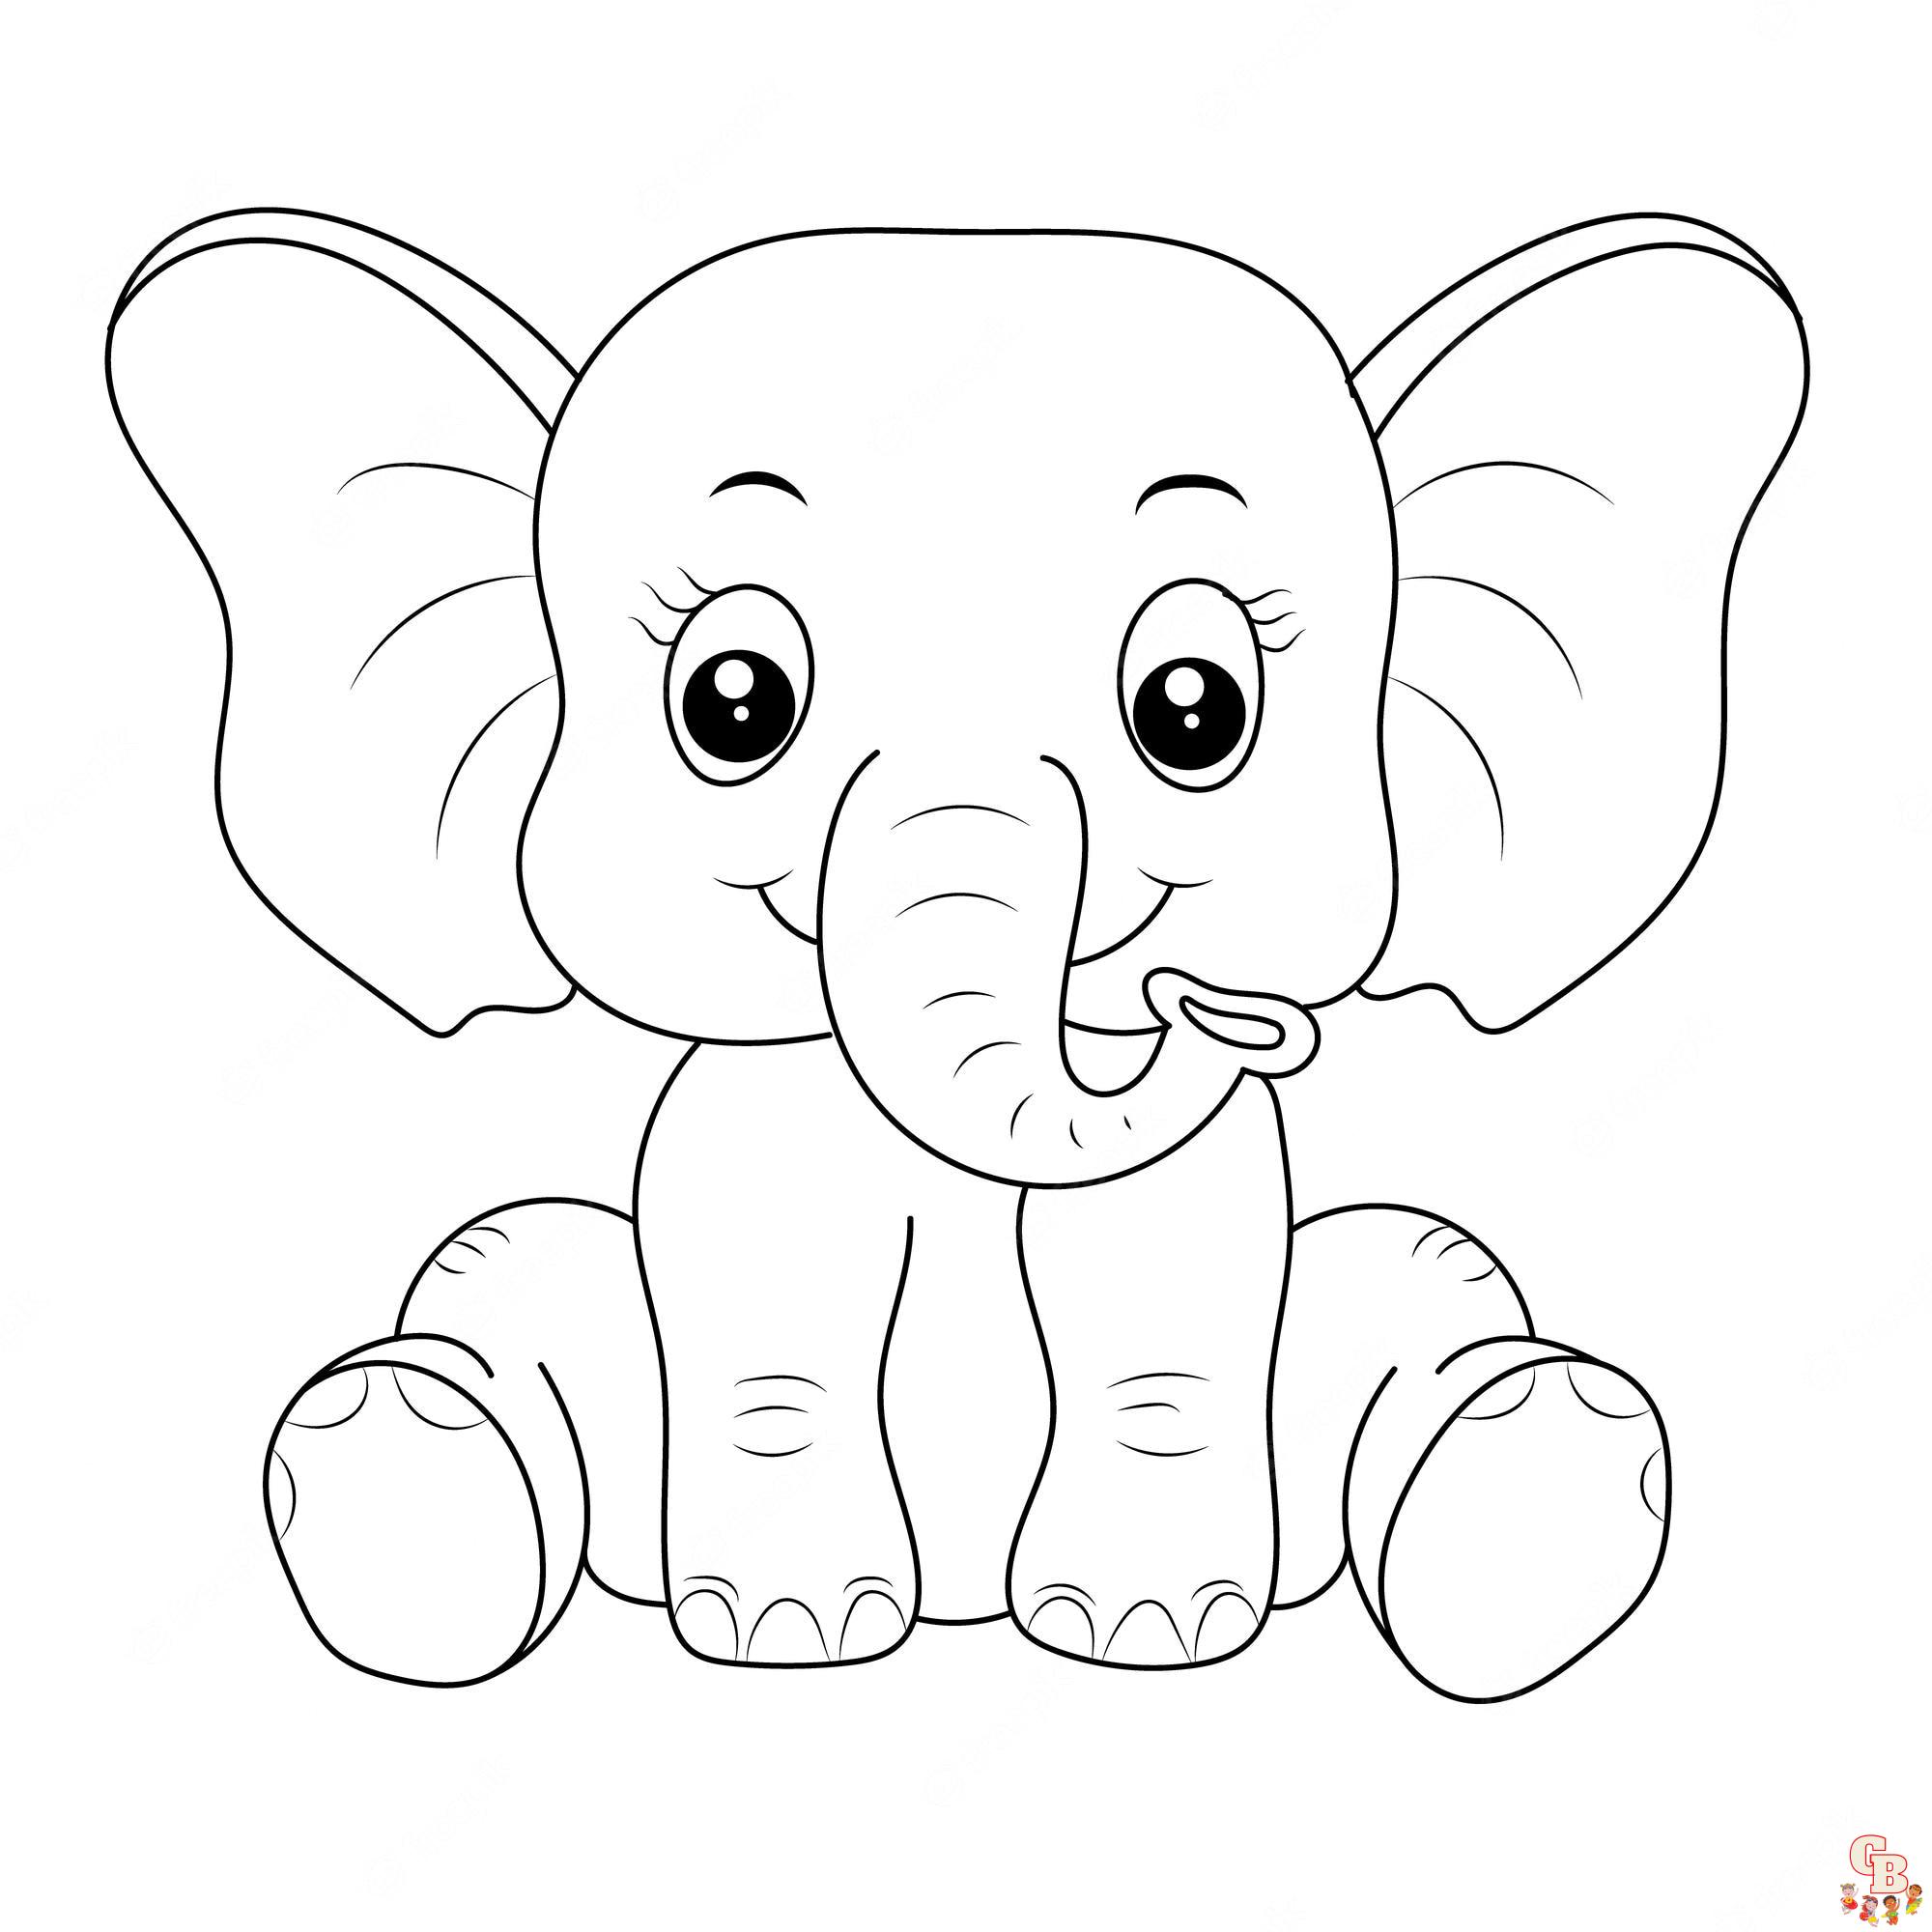 Cute Elephant Coloring Pages 4